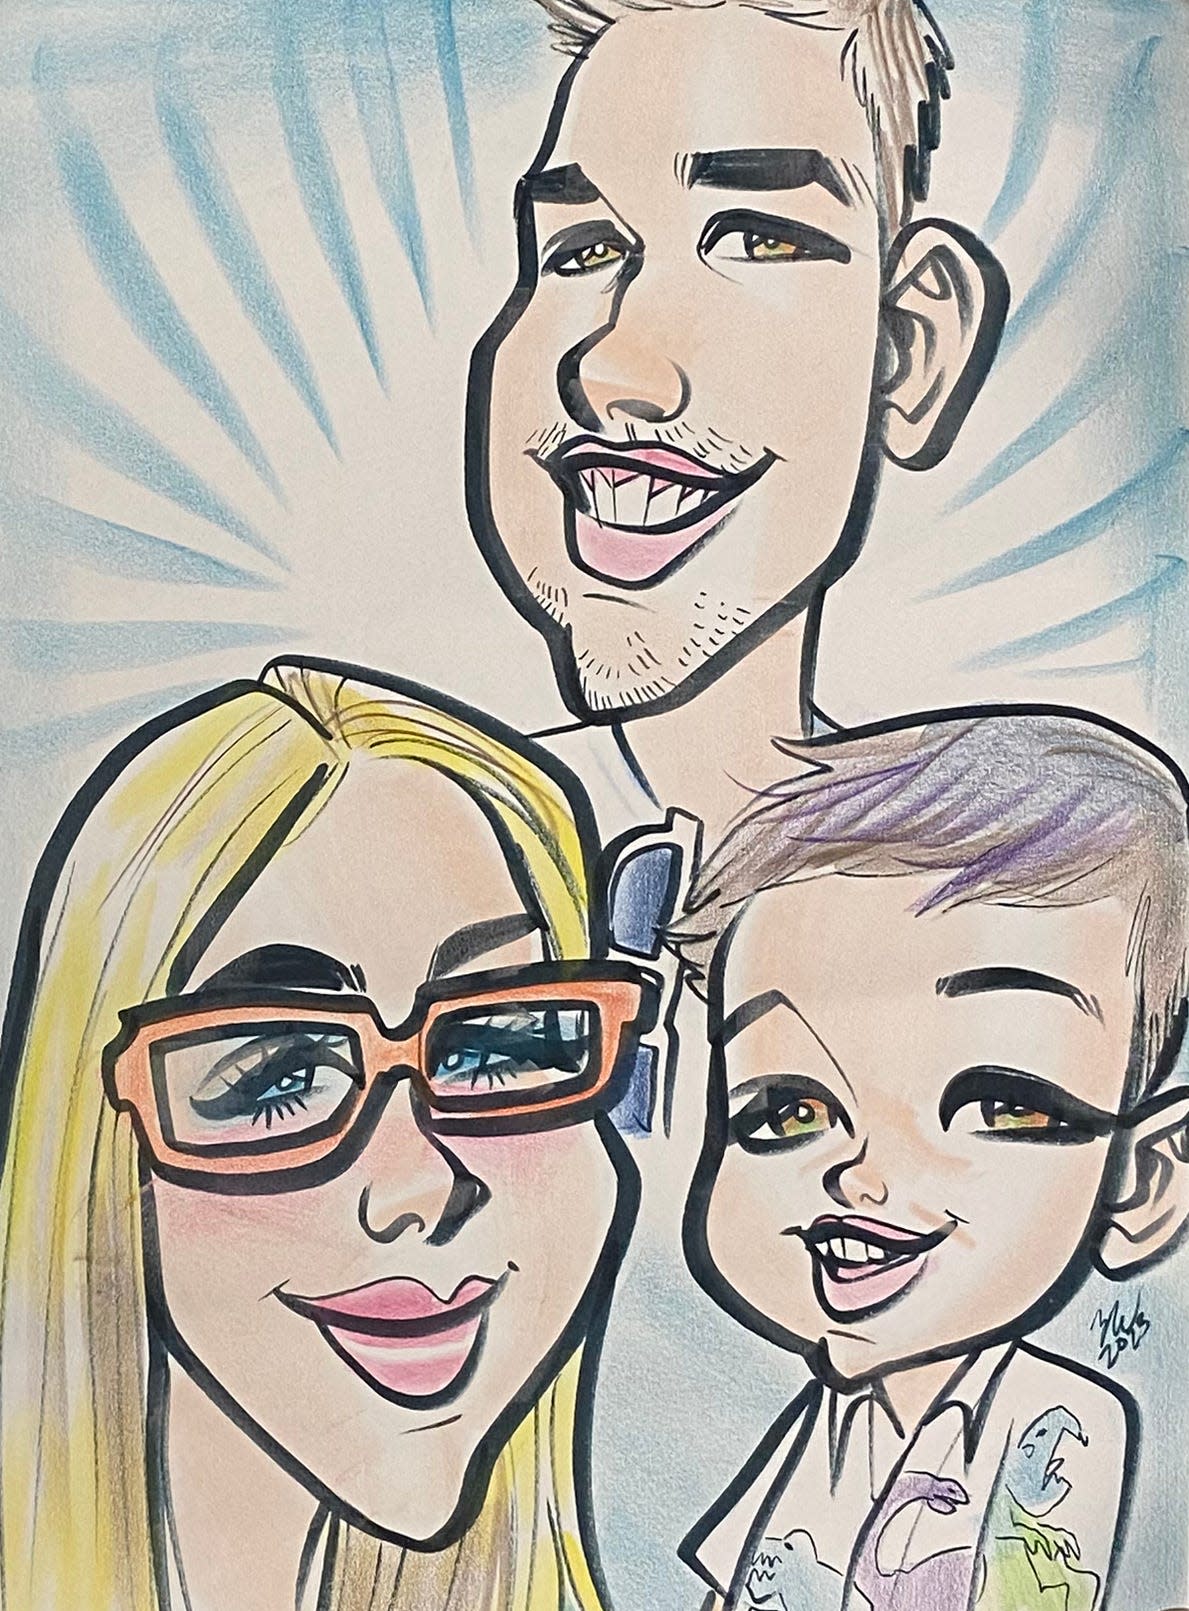 A portrait of the writer's family by caricature artist Zoe San Wade